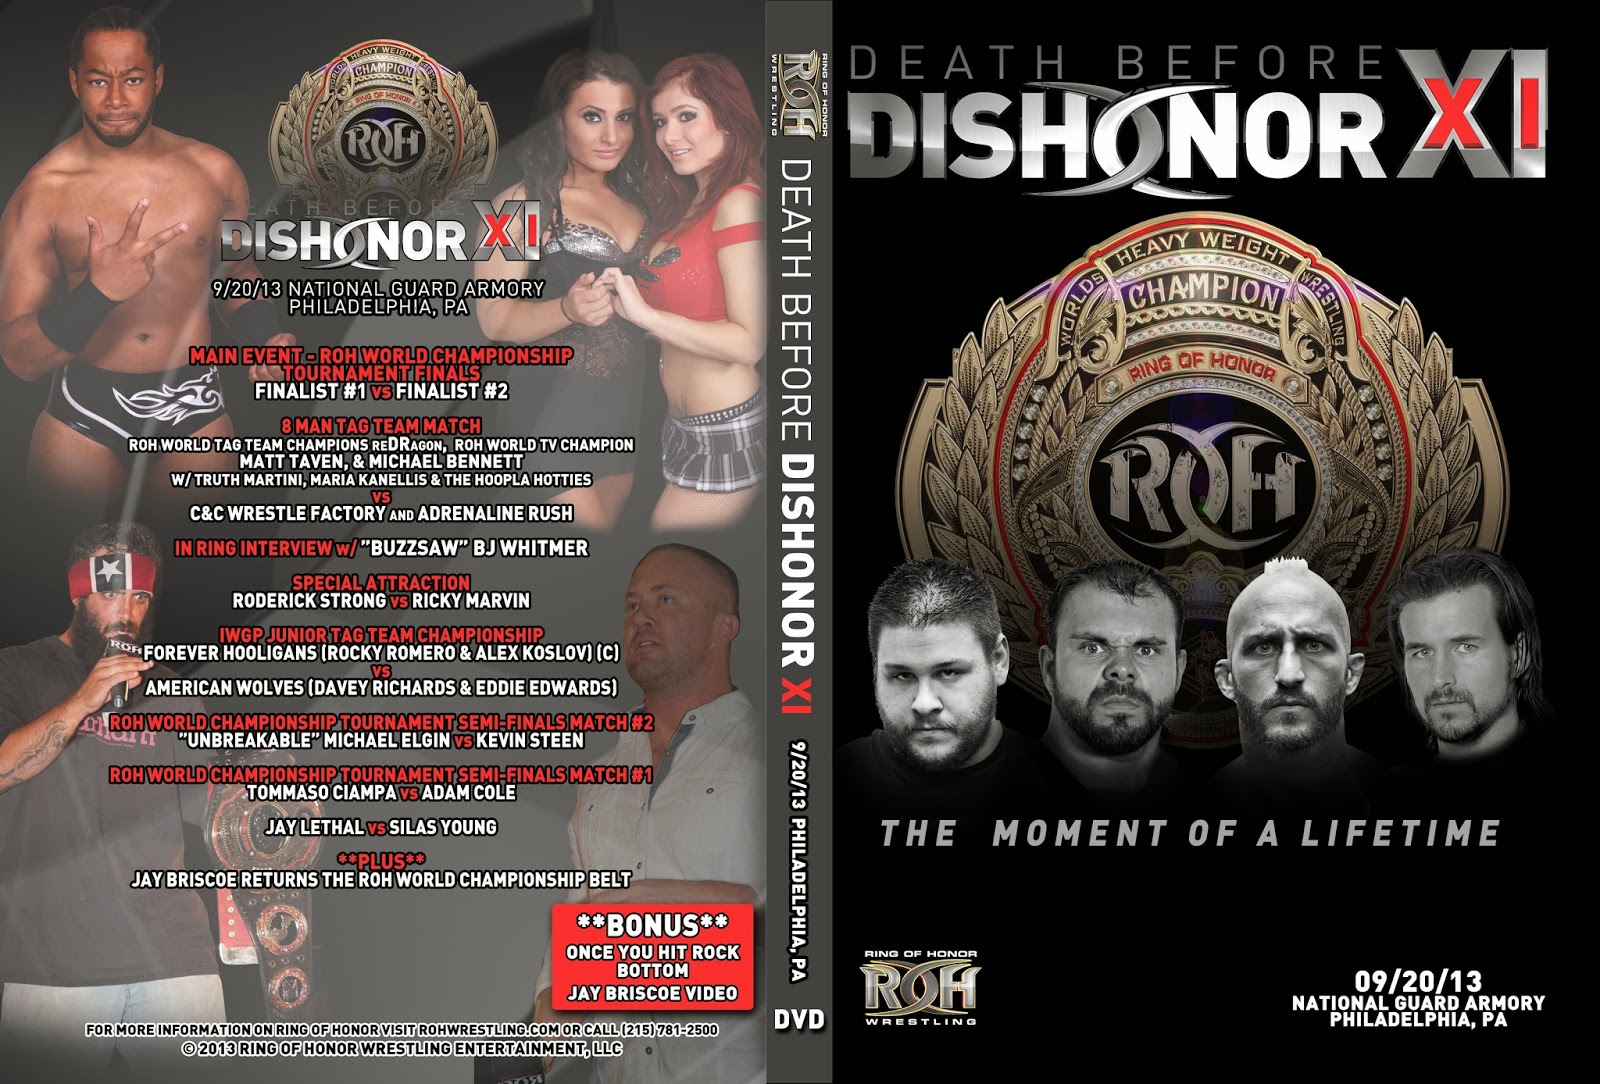 JZ Says’ RetROH Reviews: Death Before Dishonor XI